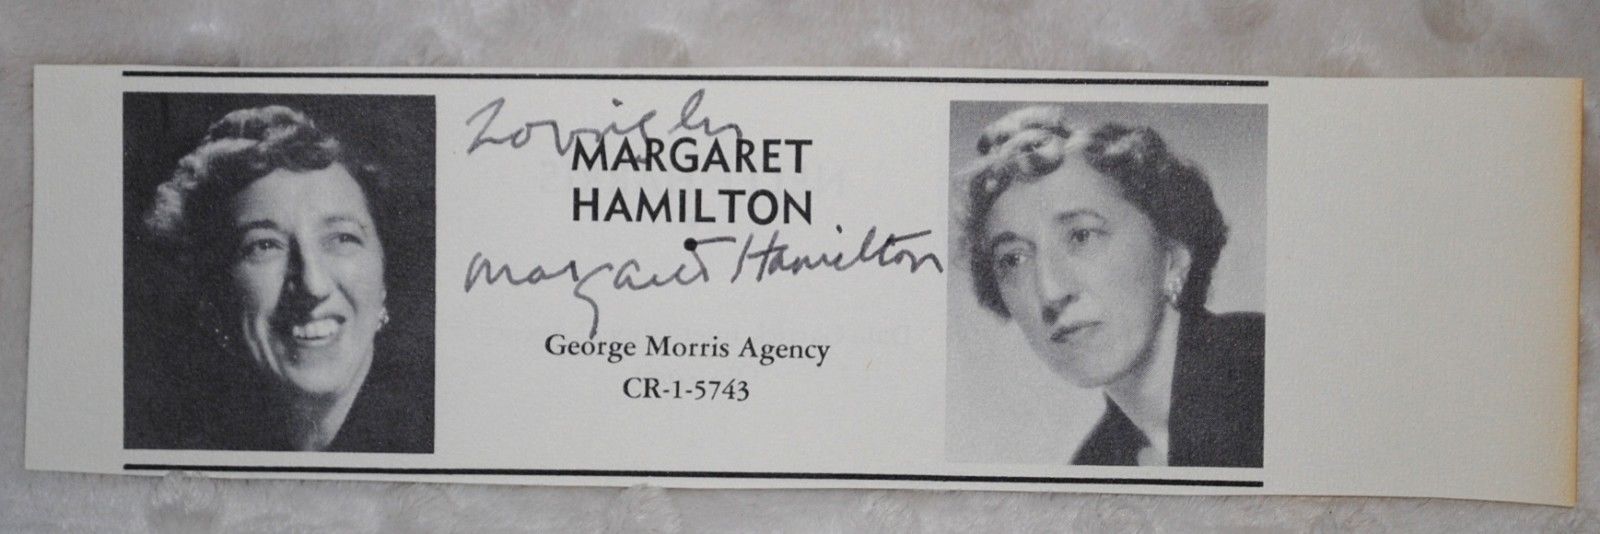 Margaret Hamilton Wizard of Oz Bad Witch Signed Star Agency Book Clip W/Photo